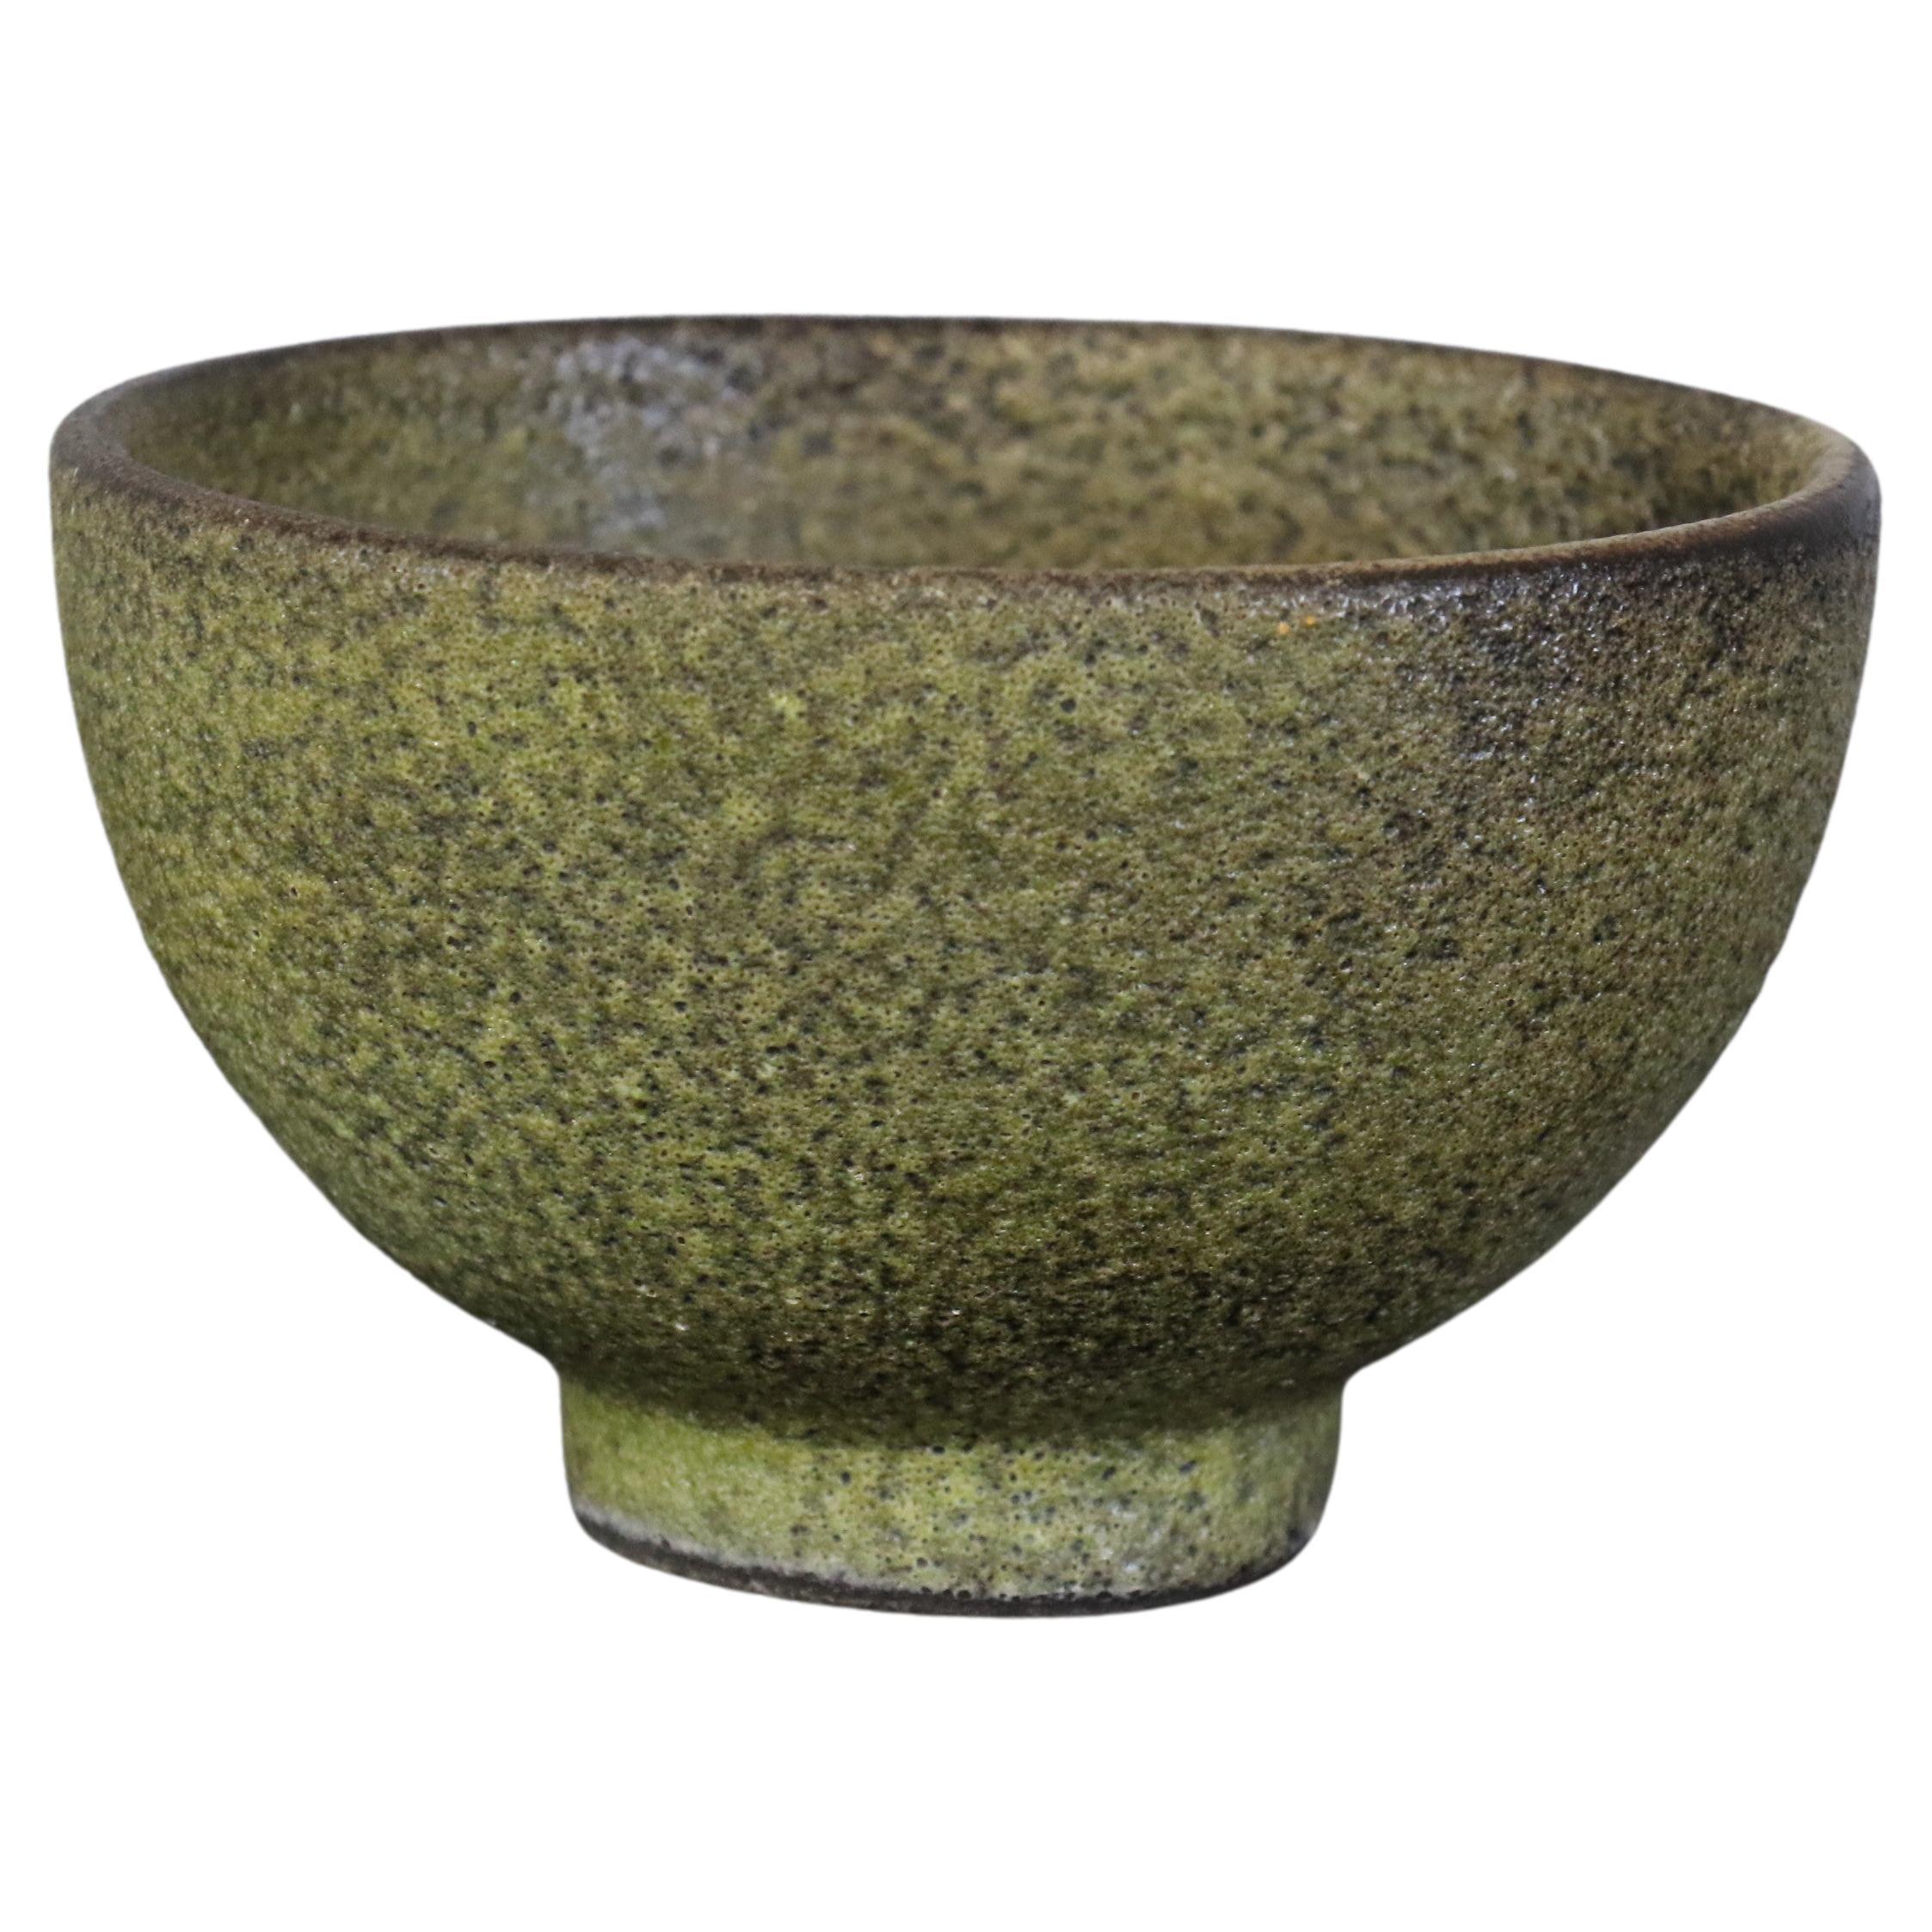 Bowl with Lava Glaze, Attributed to James Lovera, 1970 For Sale